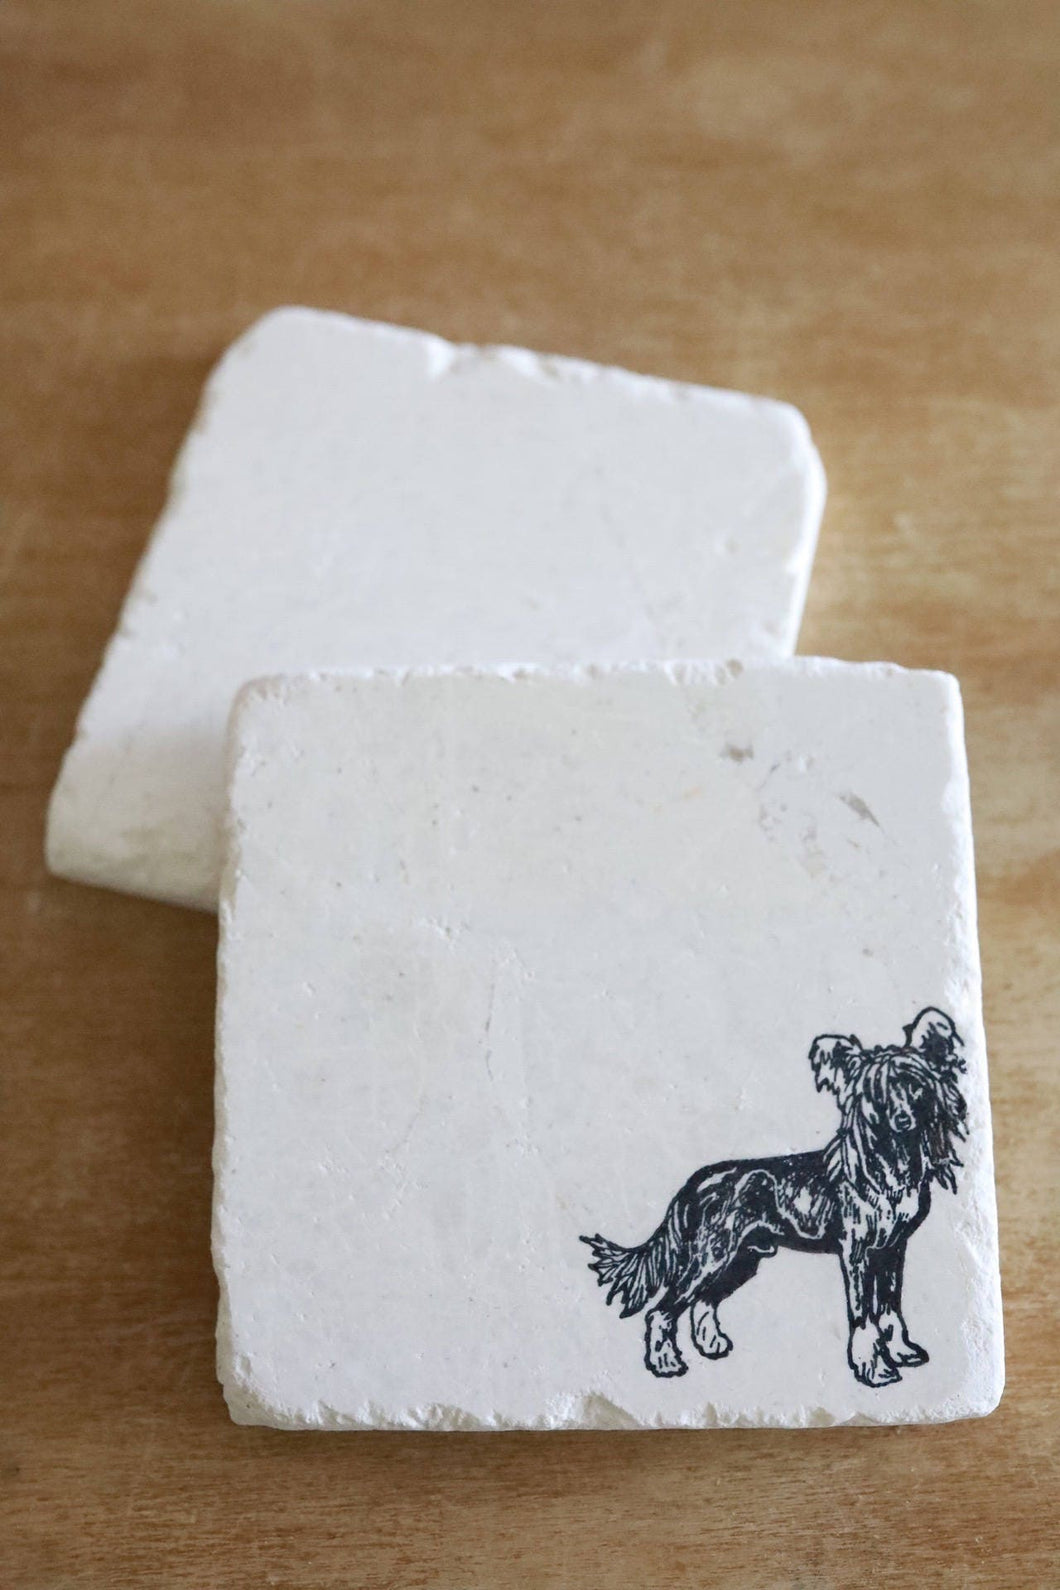 Chinese Crested Marble Coasters / Chinese Crested / Chinese Crested gift/ marble coasters/ marble coaster set/ drink coasters/stone coasters